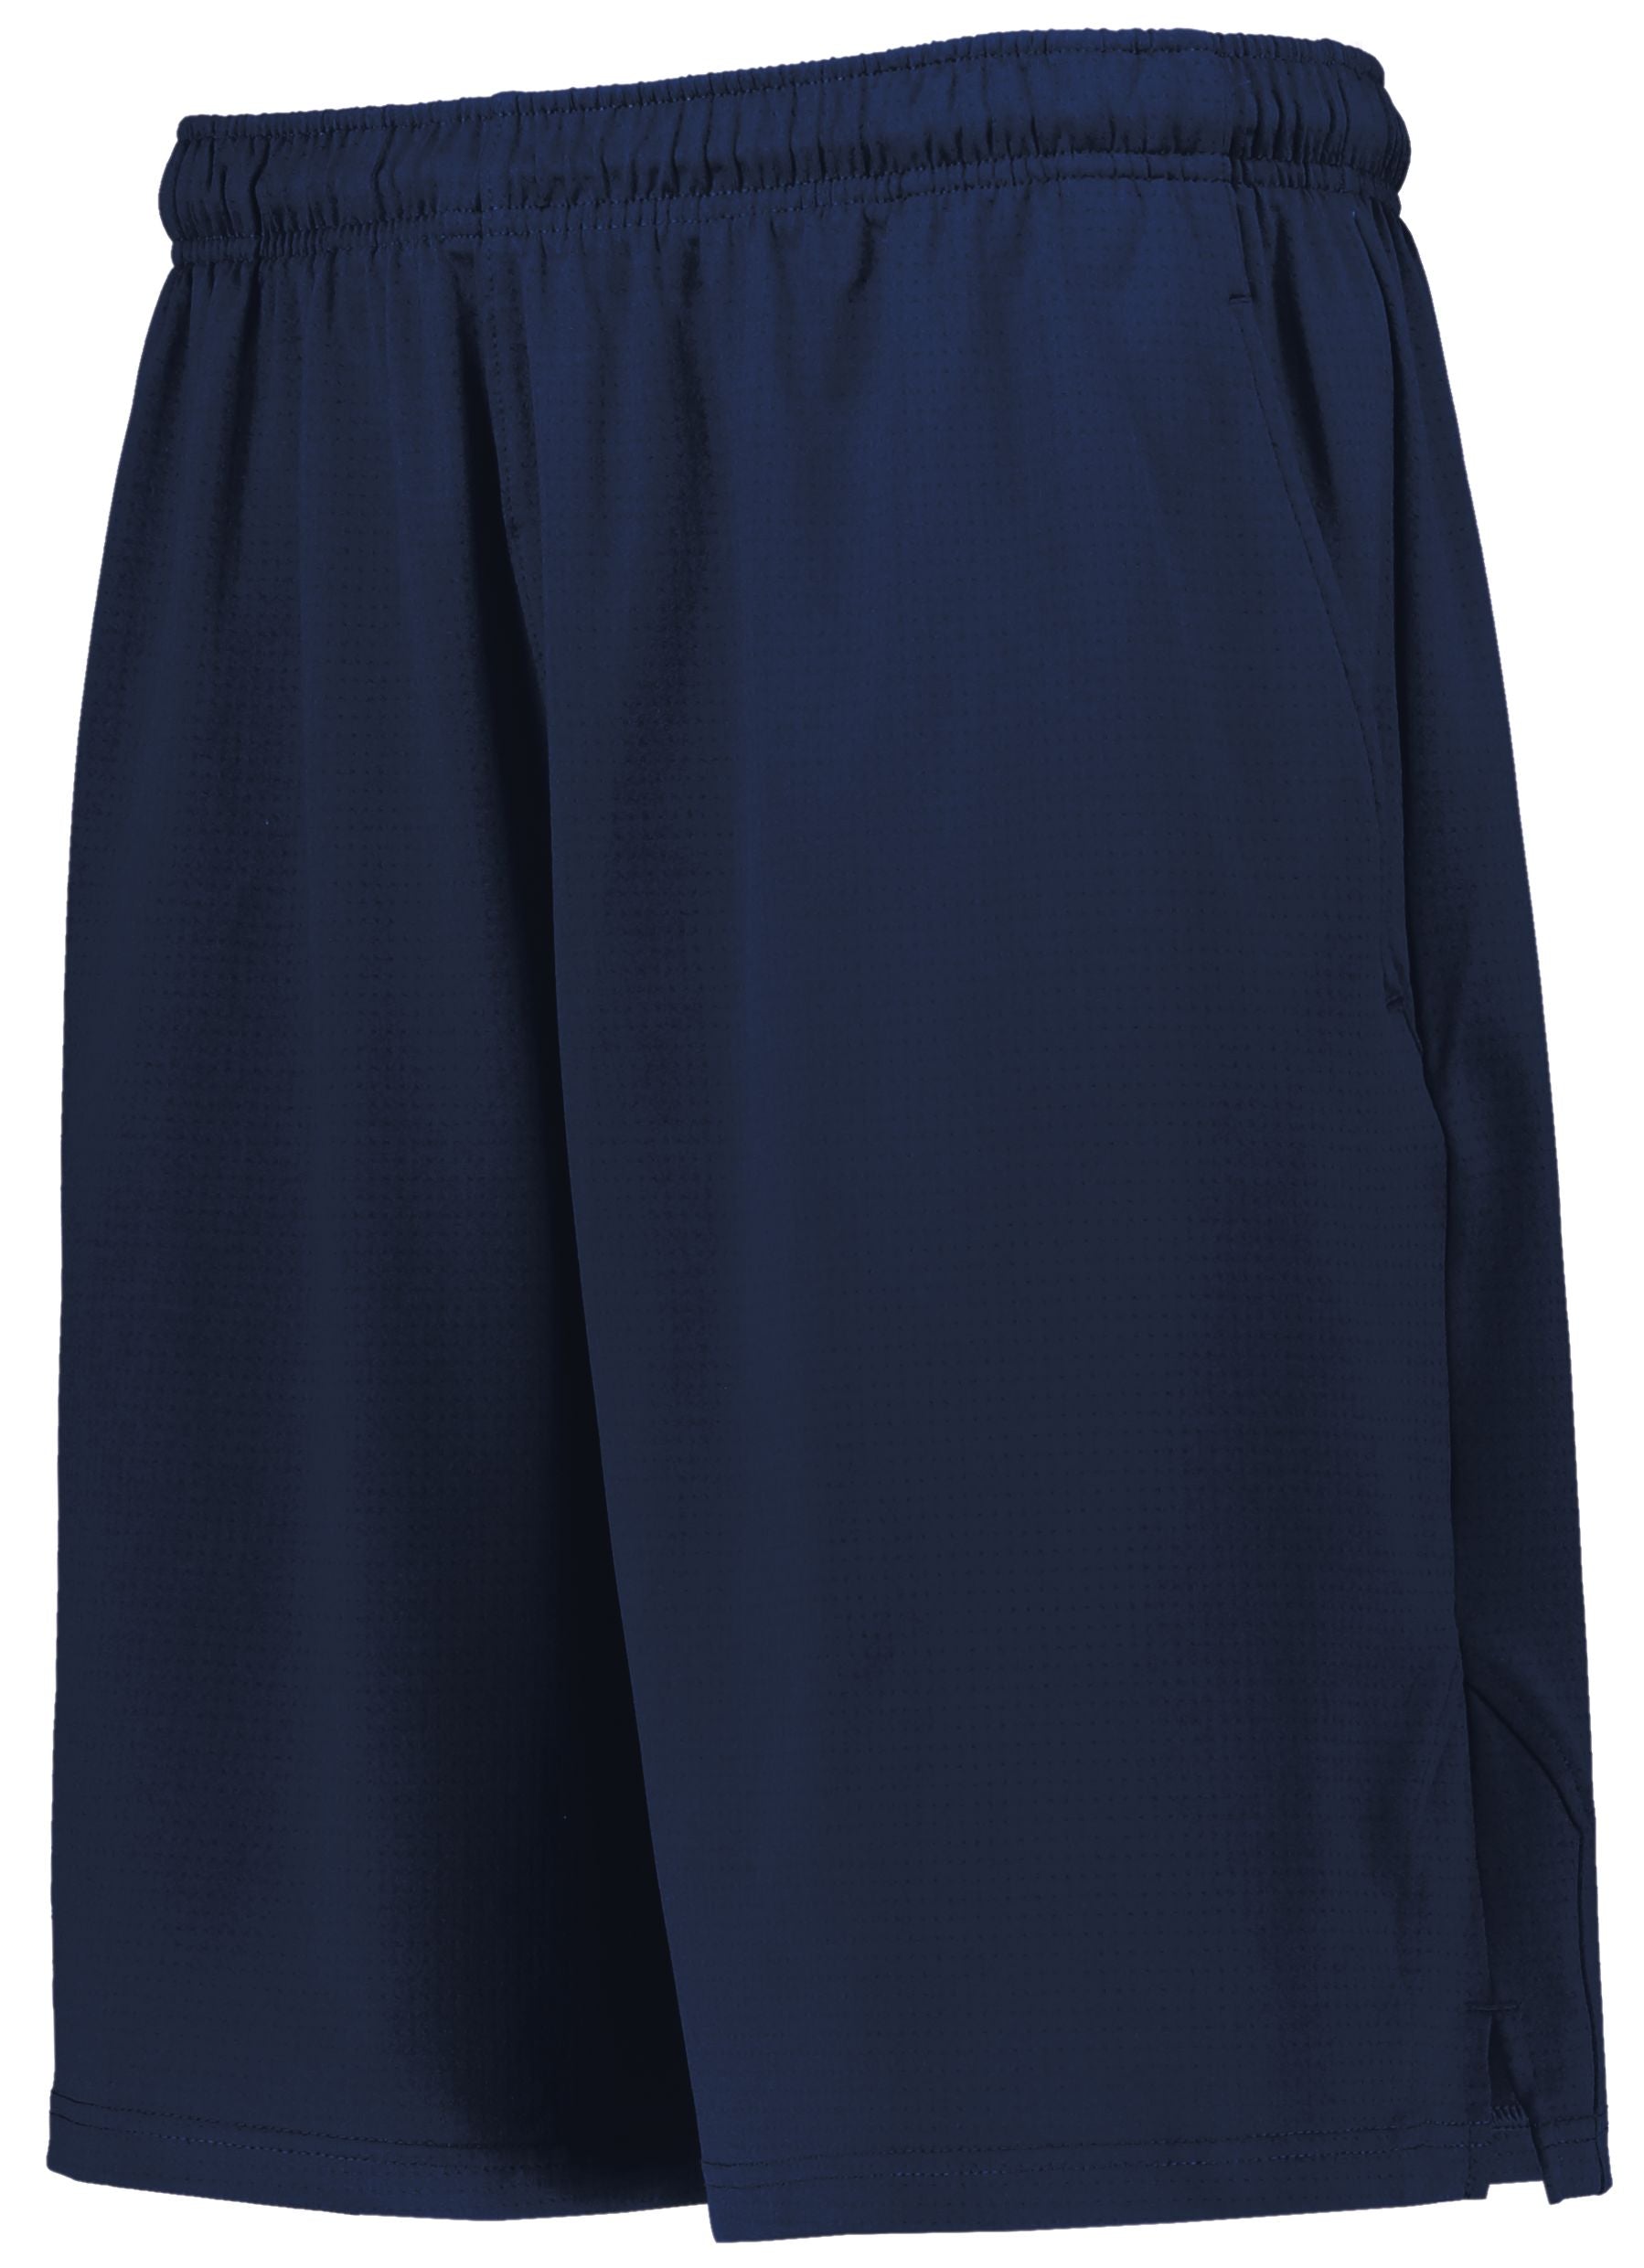 Russell Athletic Team Driven Coaches Shorts in Navy  -Part of the Adult, Adult-Shorts, Russell-Athletic-Products product lines at KanaleyCreations.com